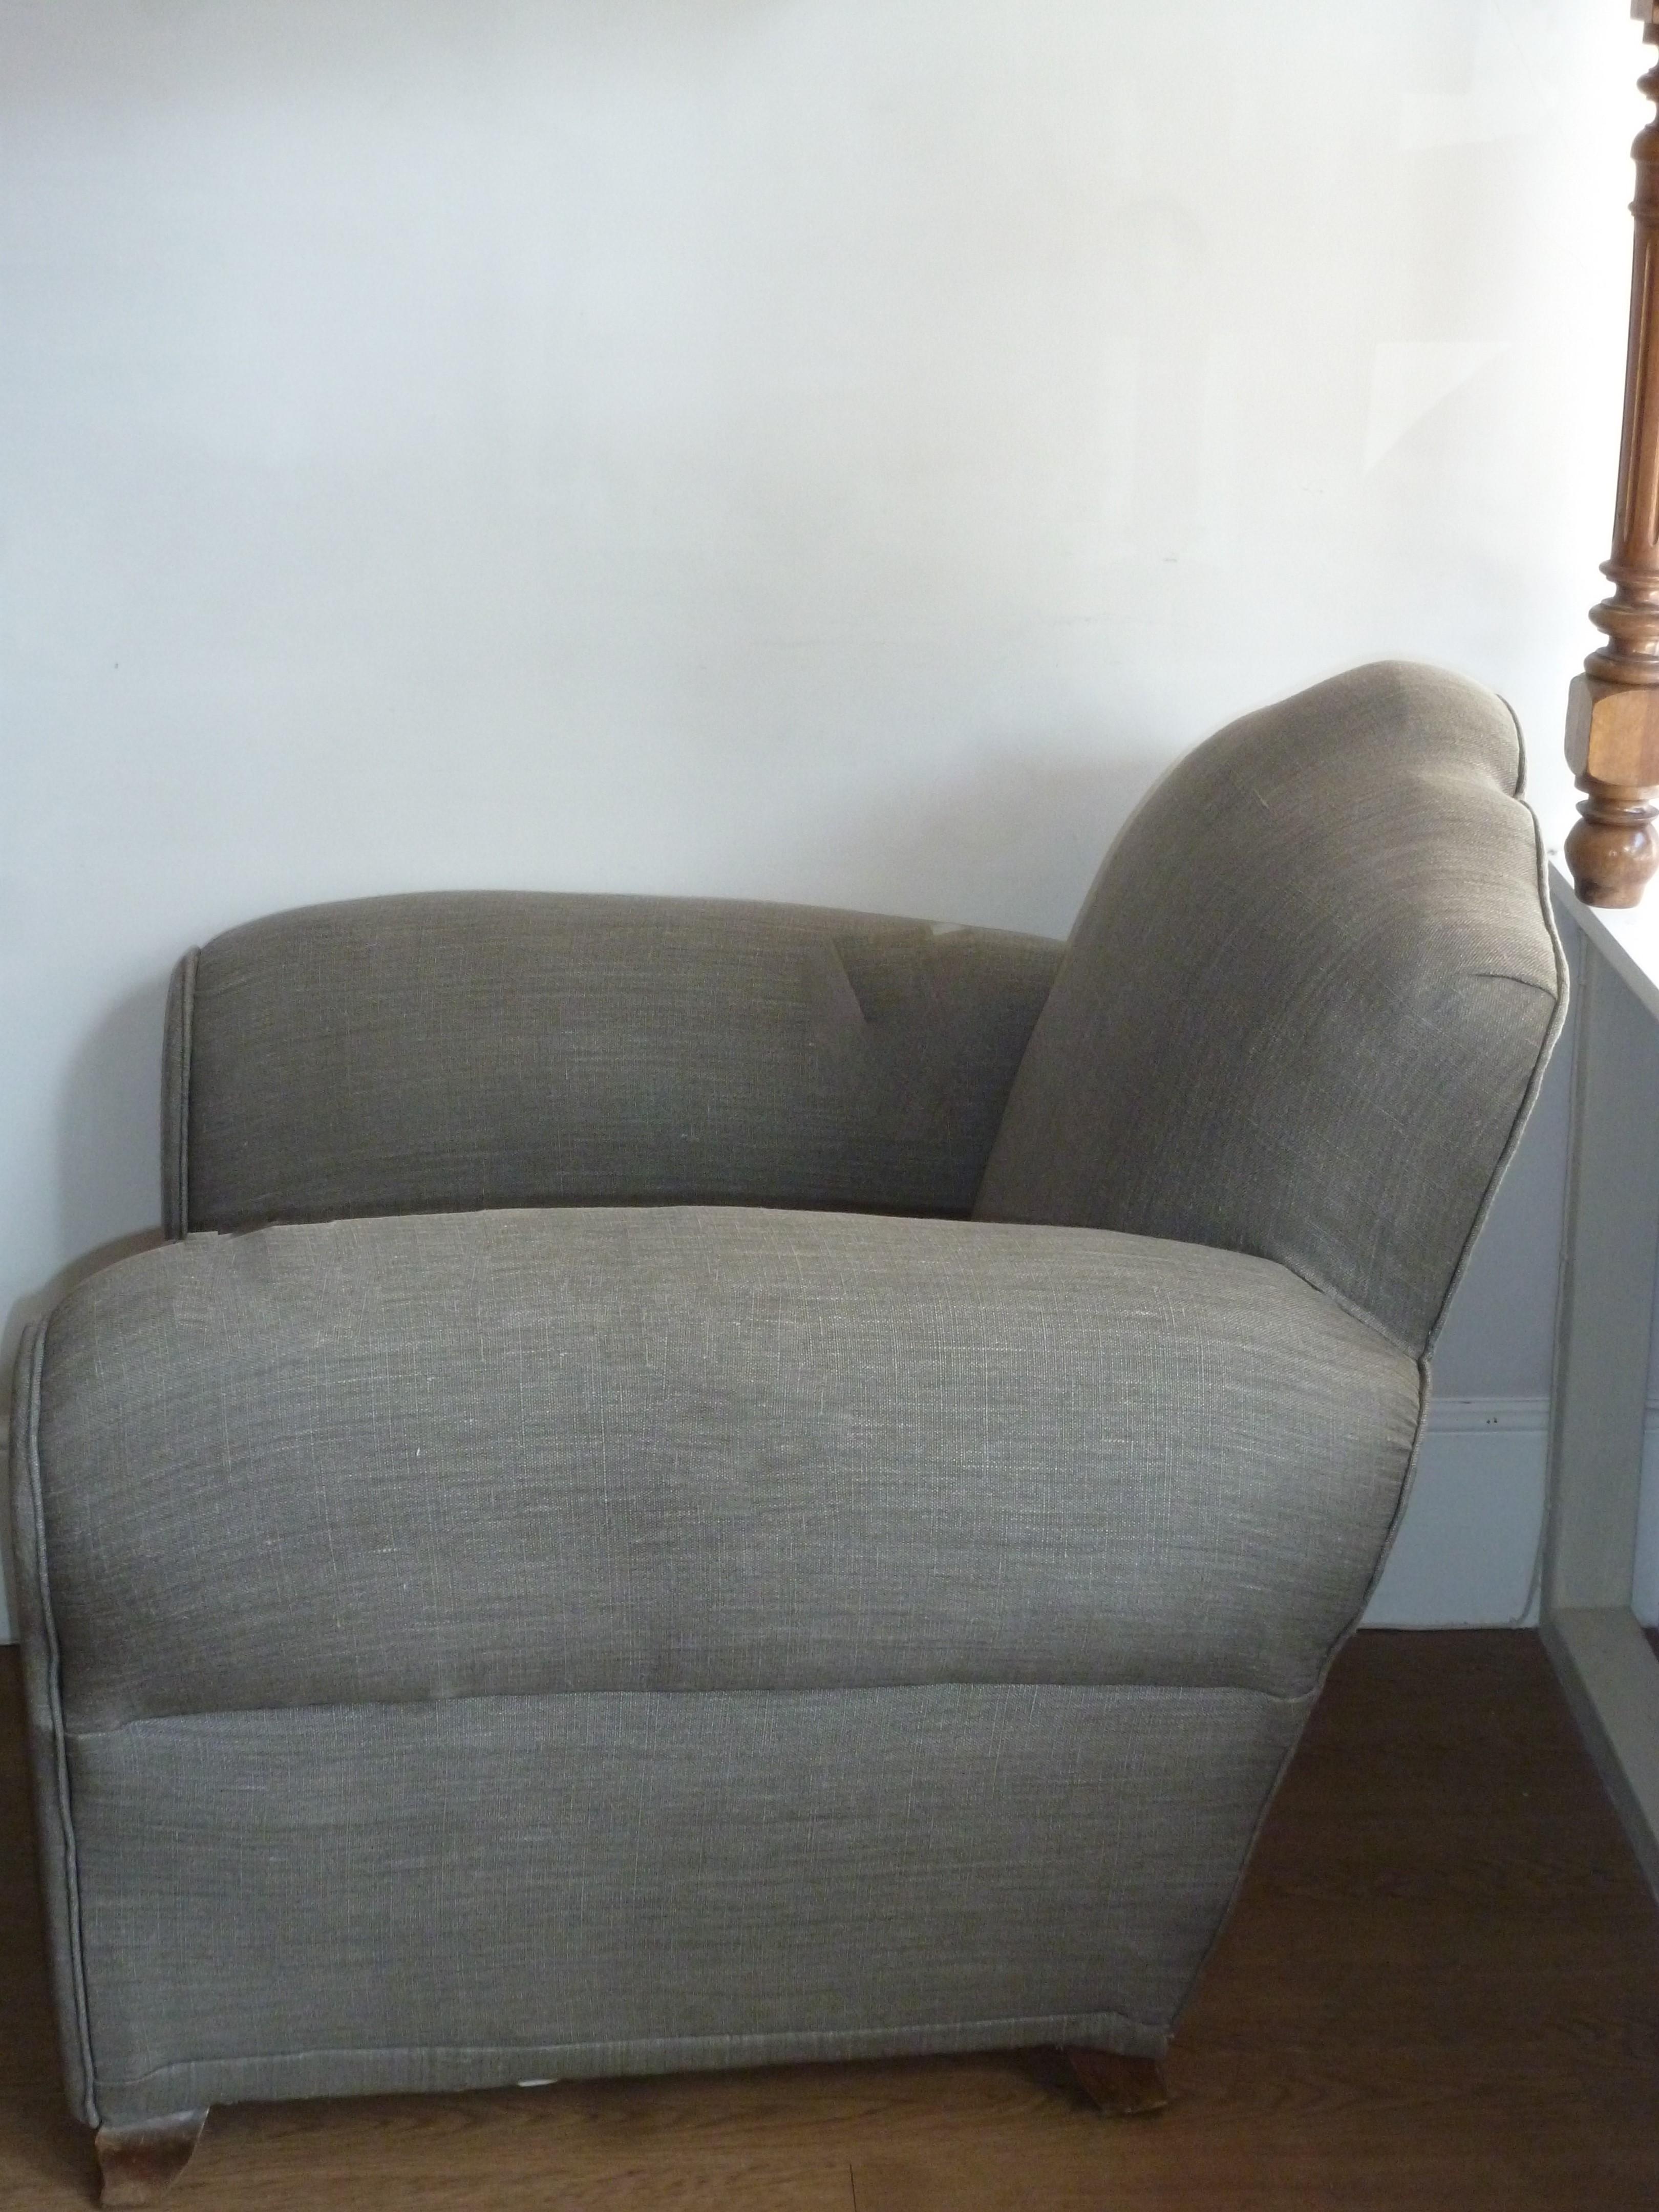 Iconic 1940 French Art Deco Club Chair Armchair Re-Upholstered Grey French Linen For Sale 3